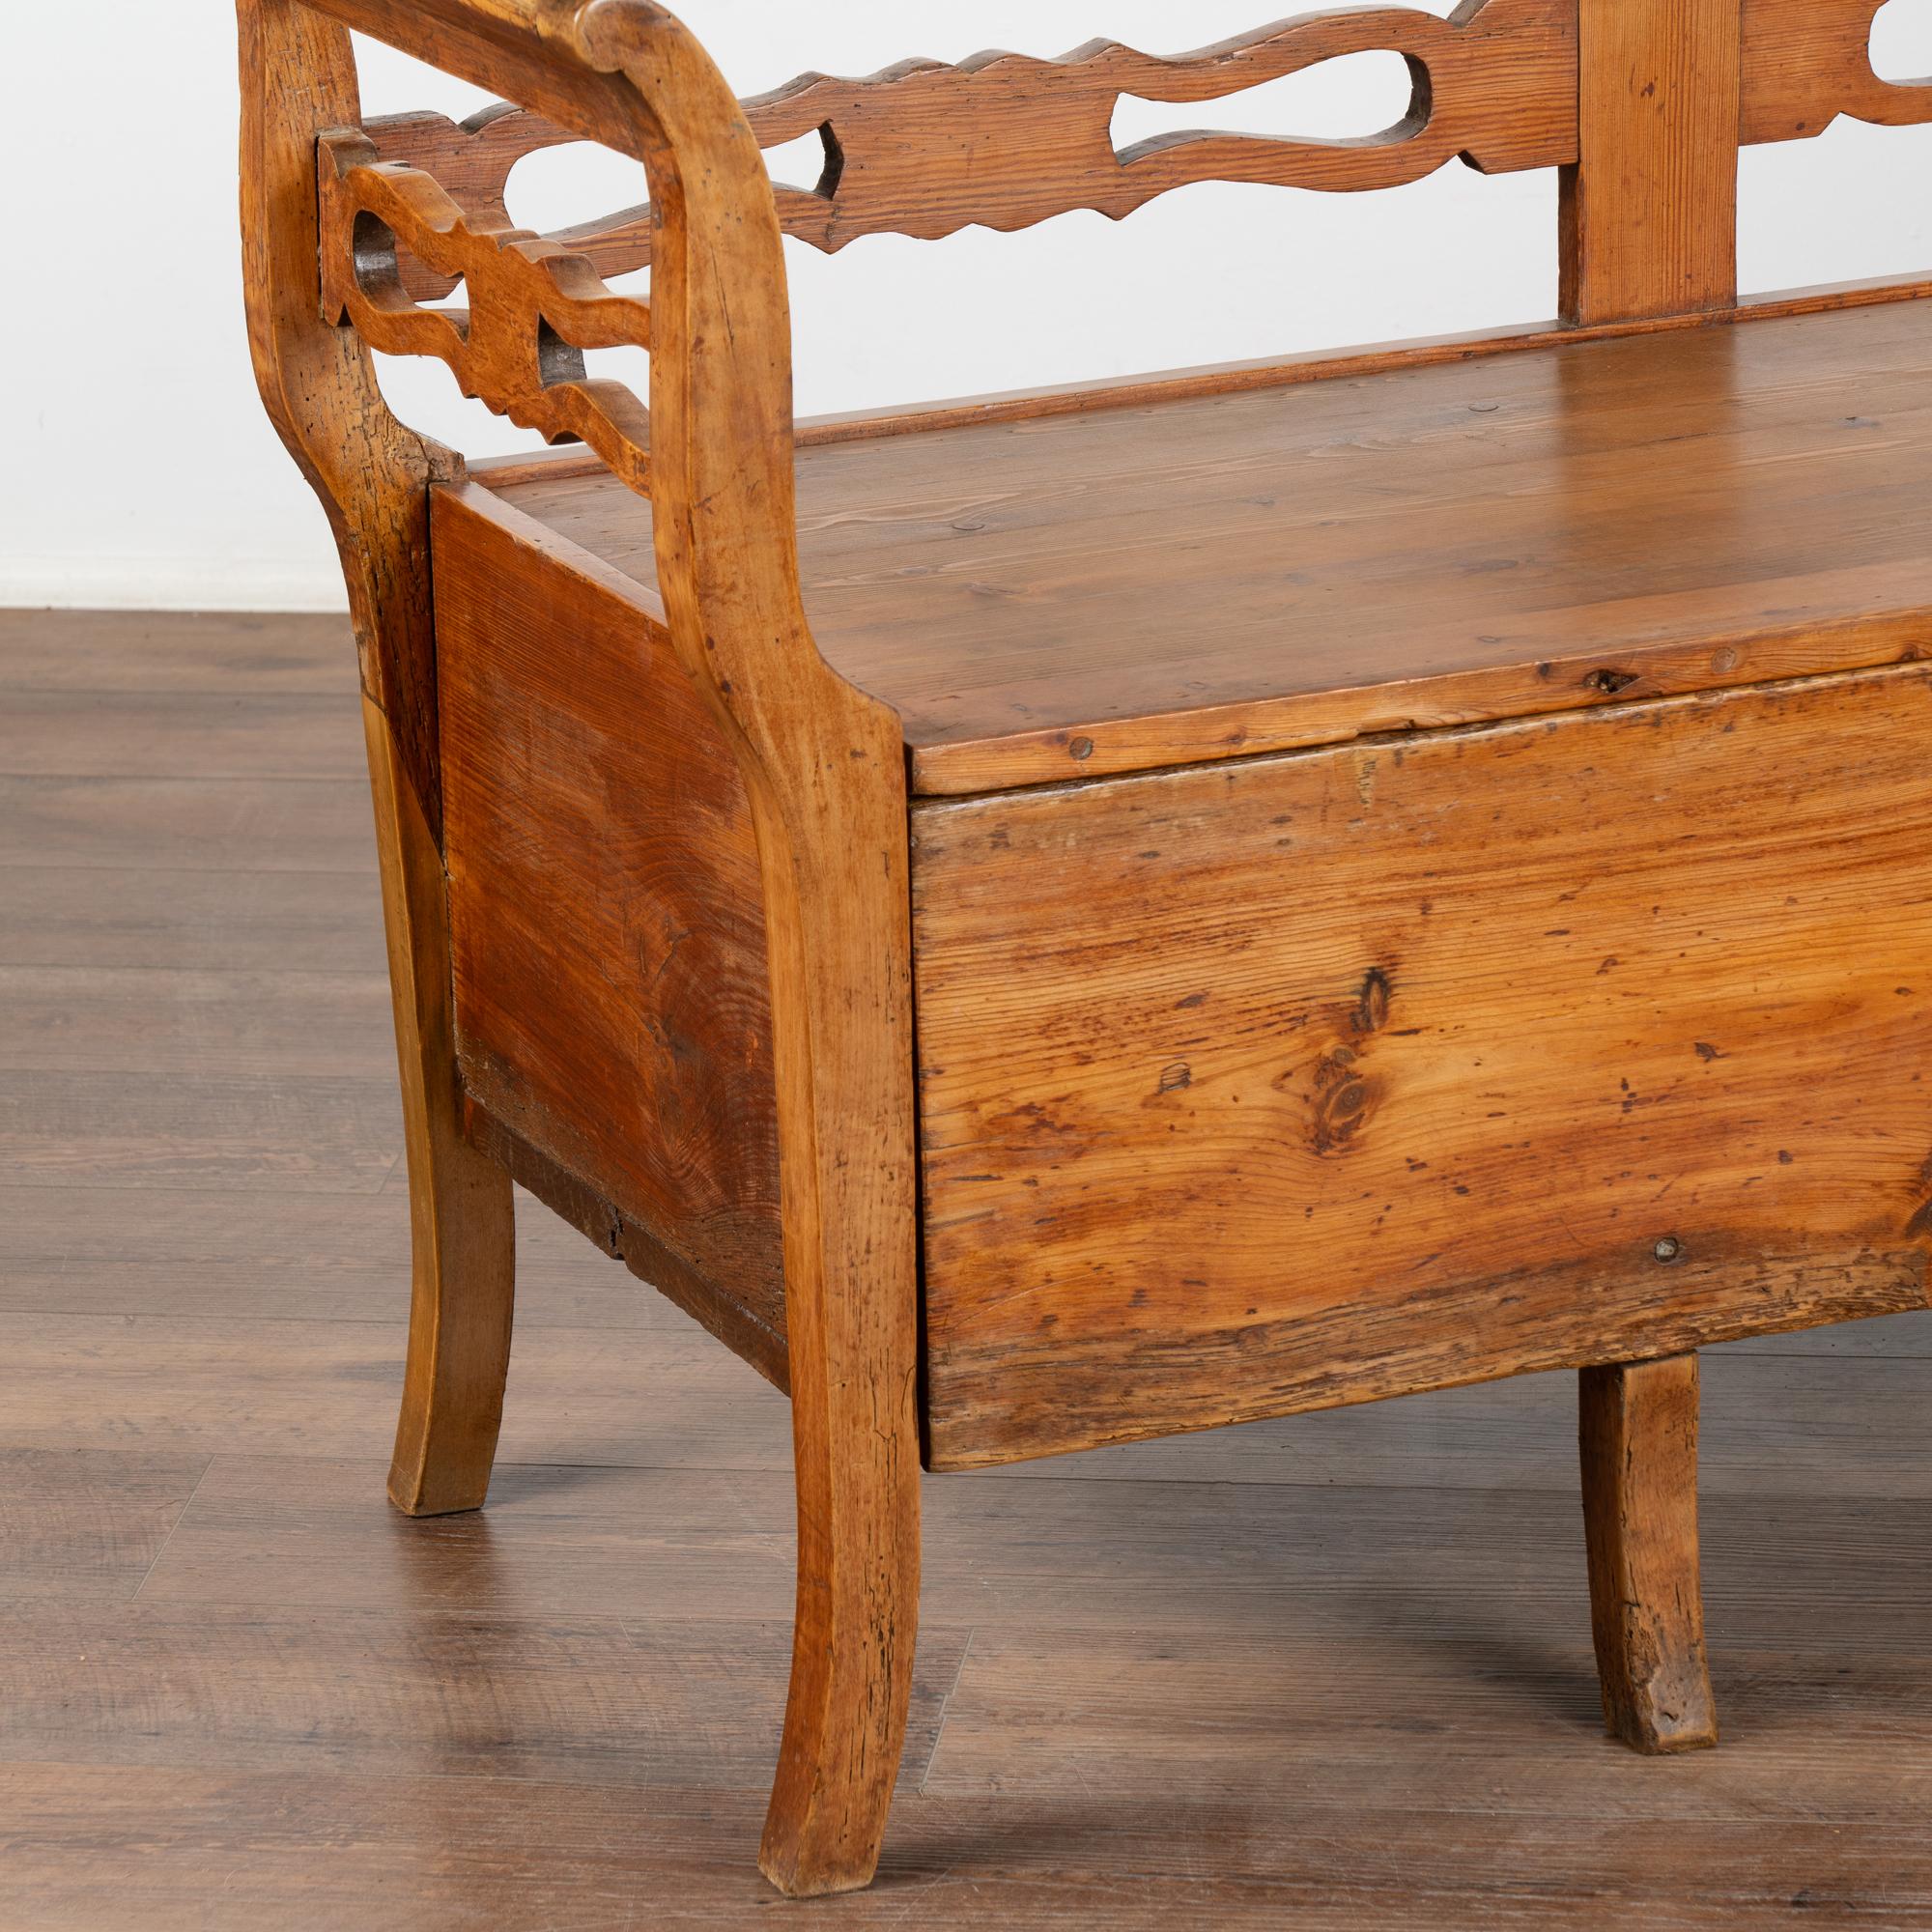 Country Swedish Pine Bench with Storage, circa 1840 For Sale